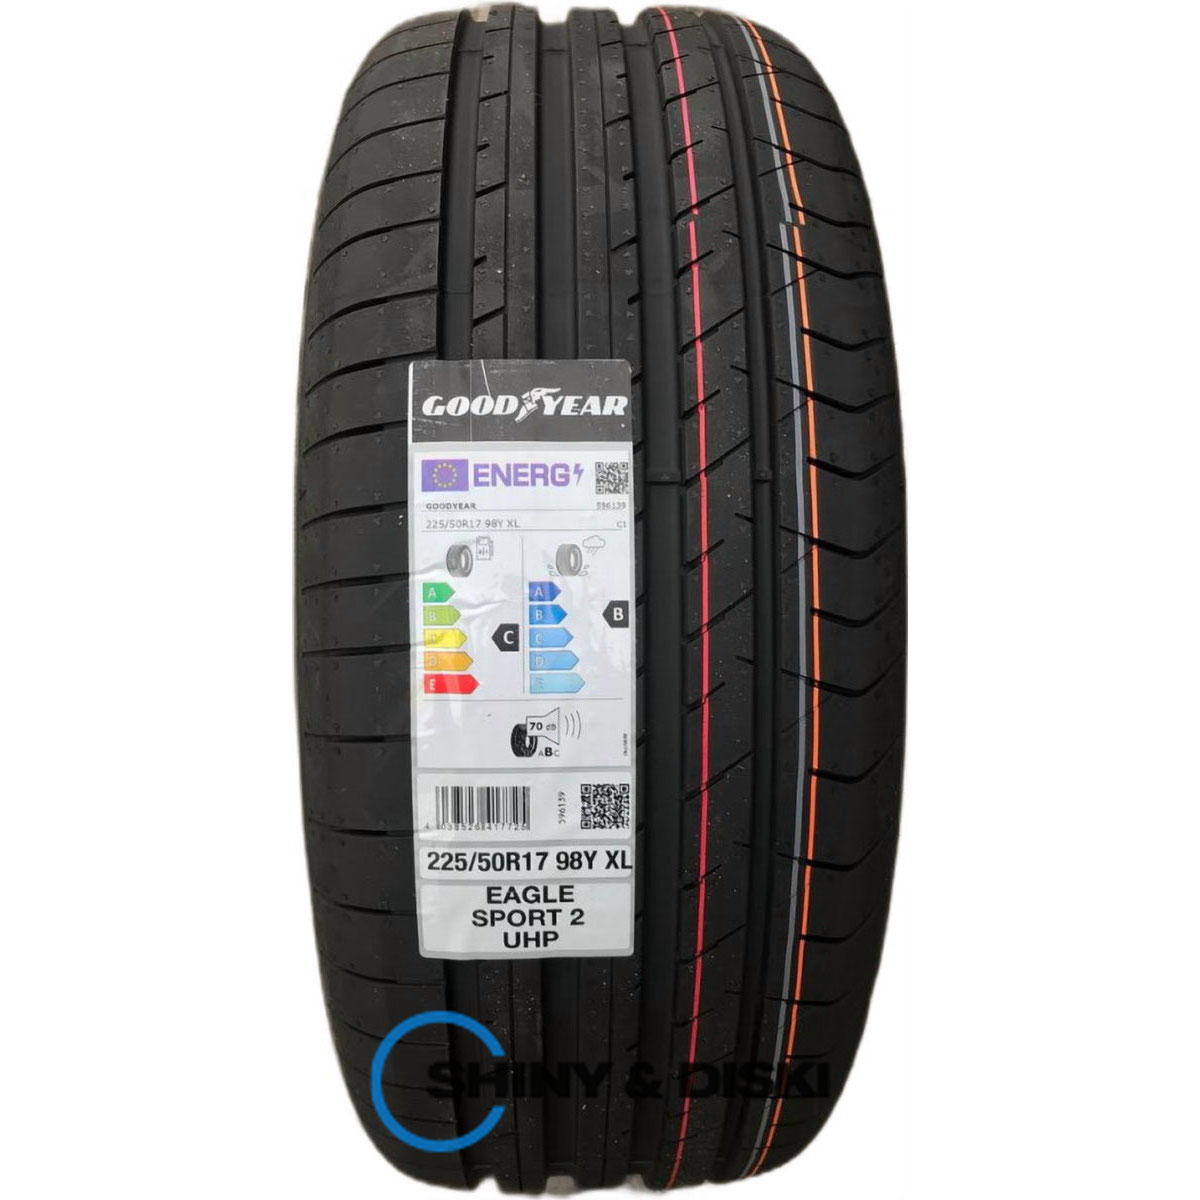 покришки goodyear eagle sport 2 uhp 245/40 r18 97y xl fp